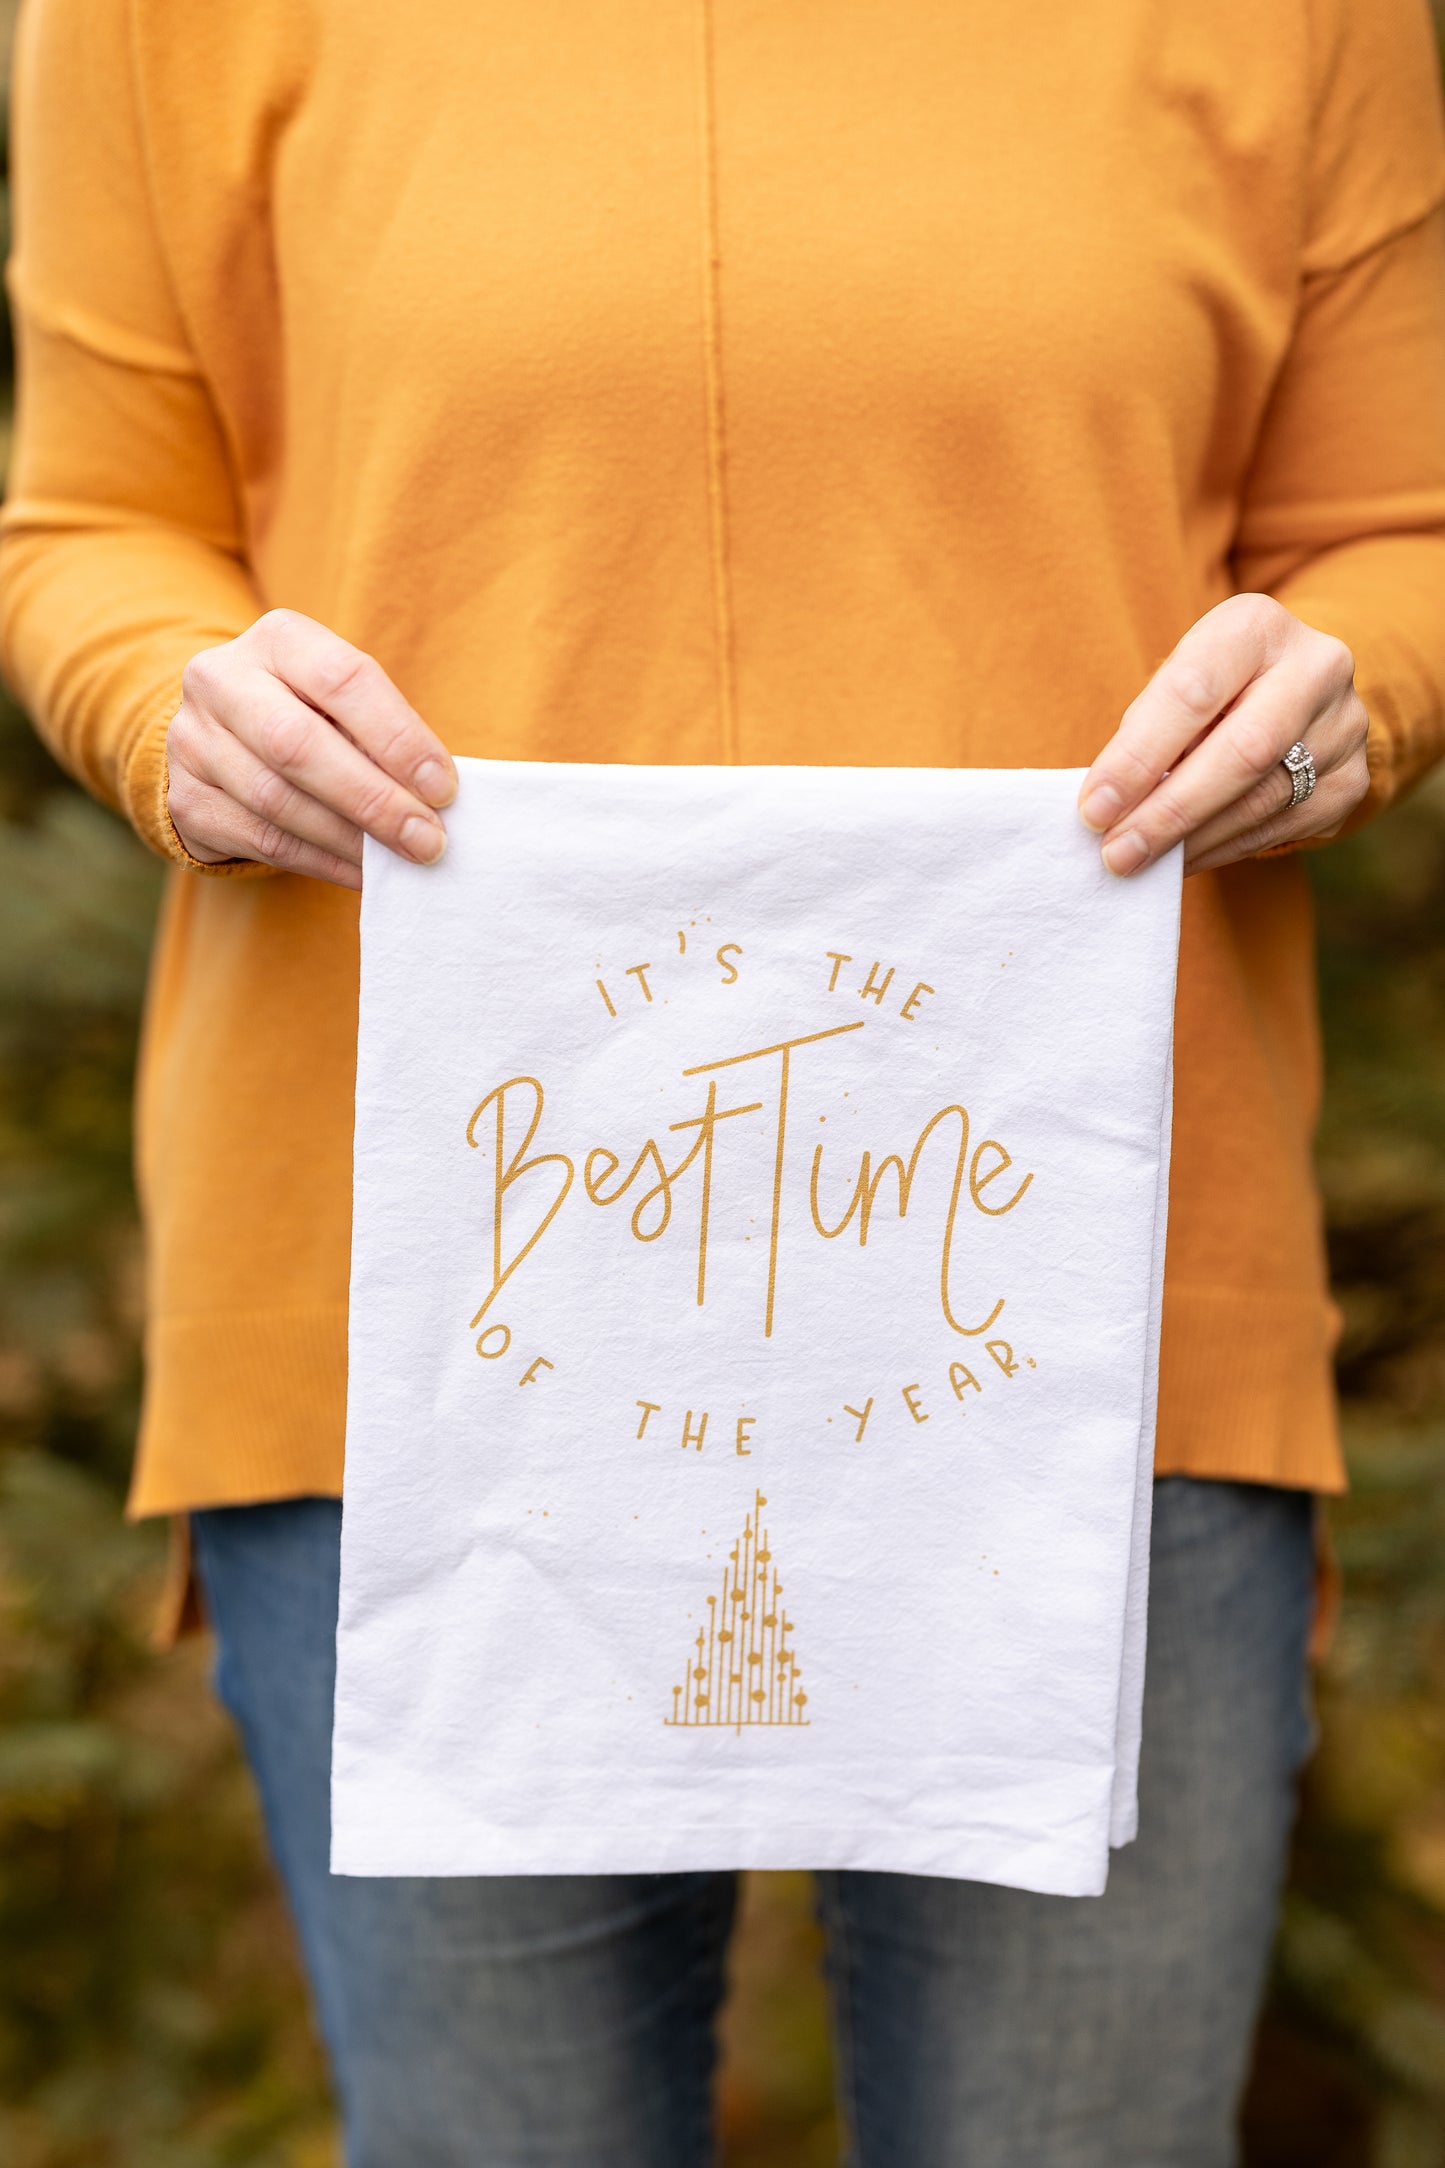 IT'S THE BEST TIME OF THE YEAR | TEA TOWEL